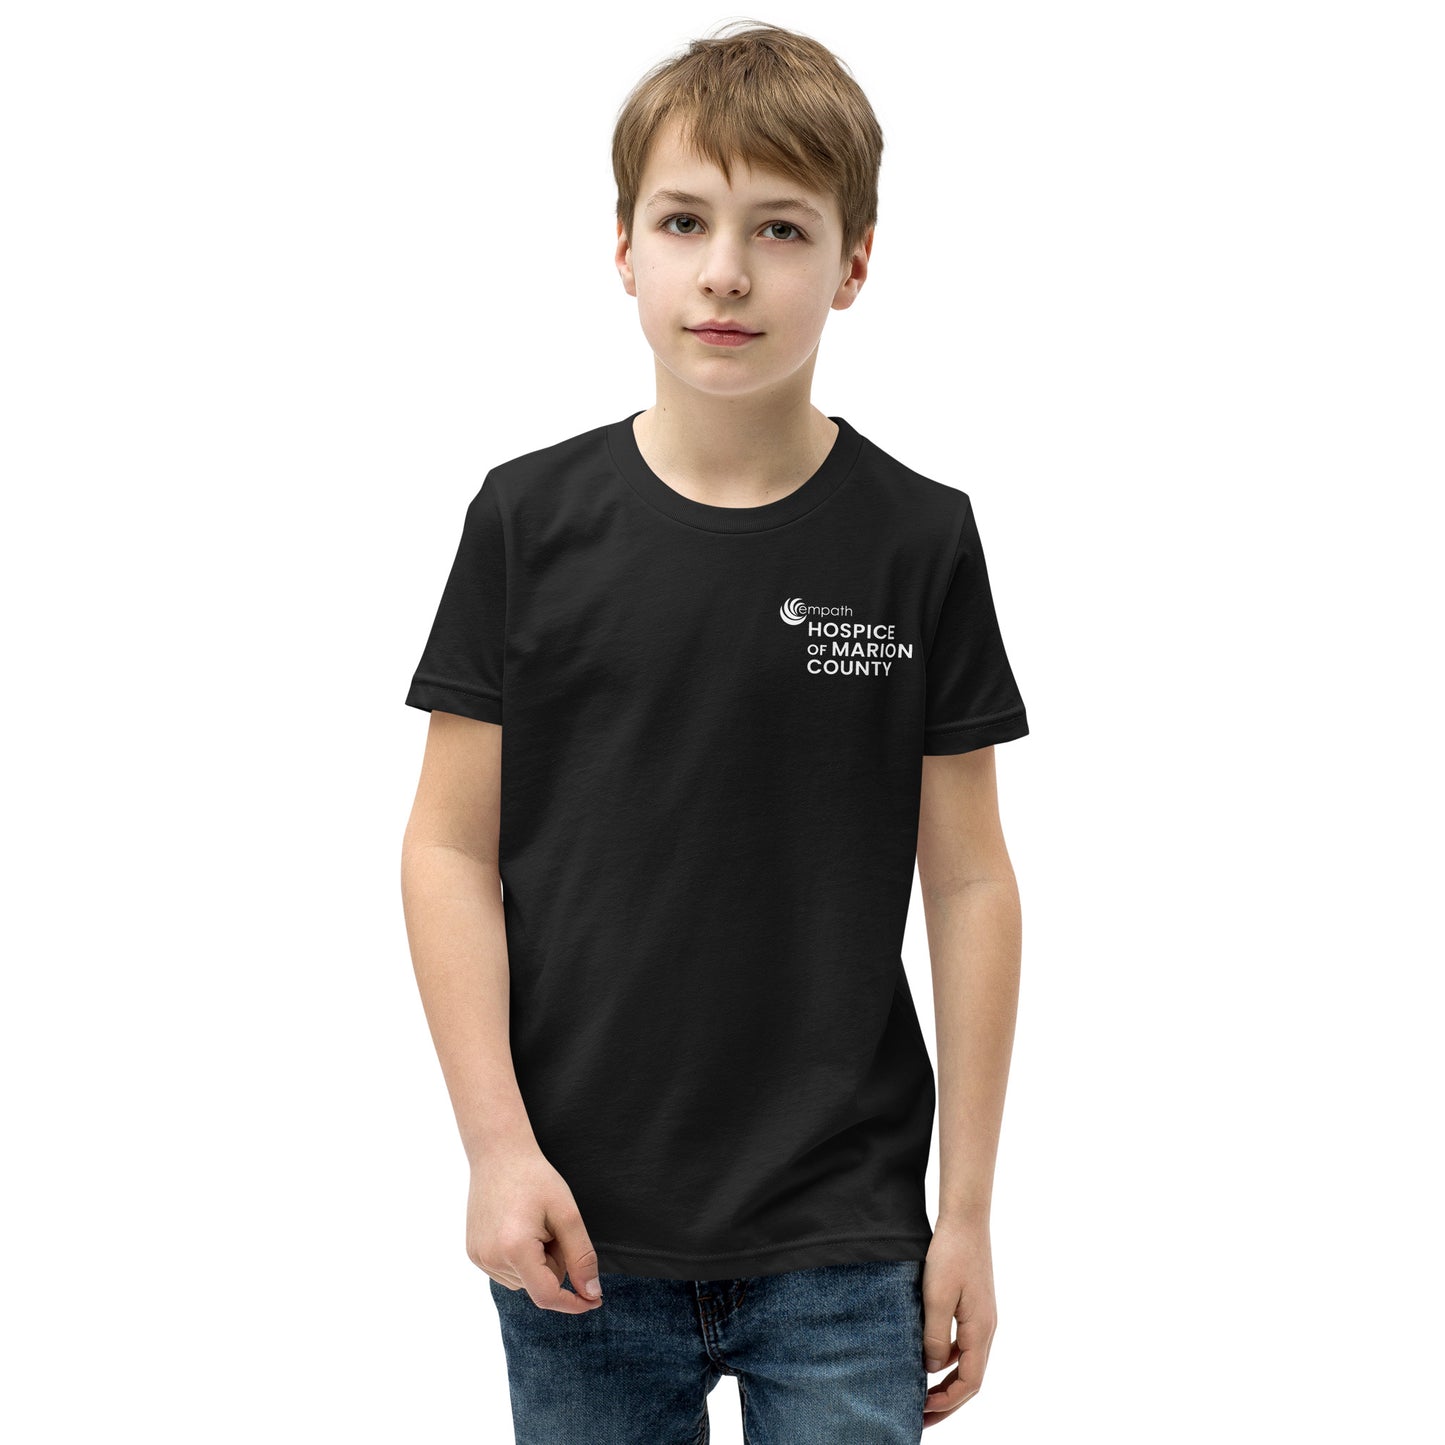 Youth Short Sleeve T-Shirt - Hospice of Marion County